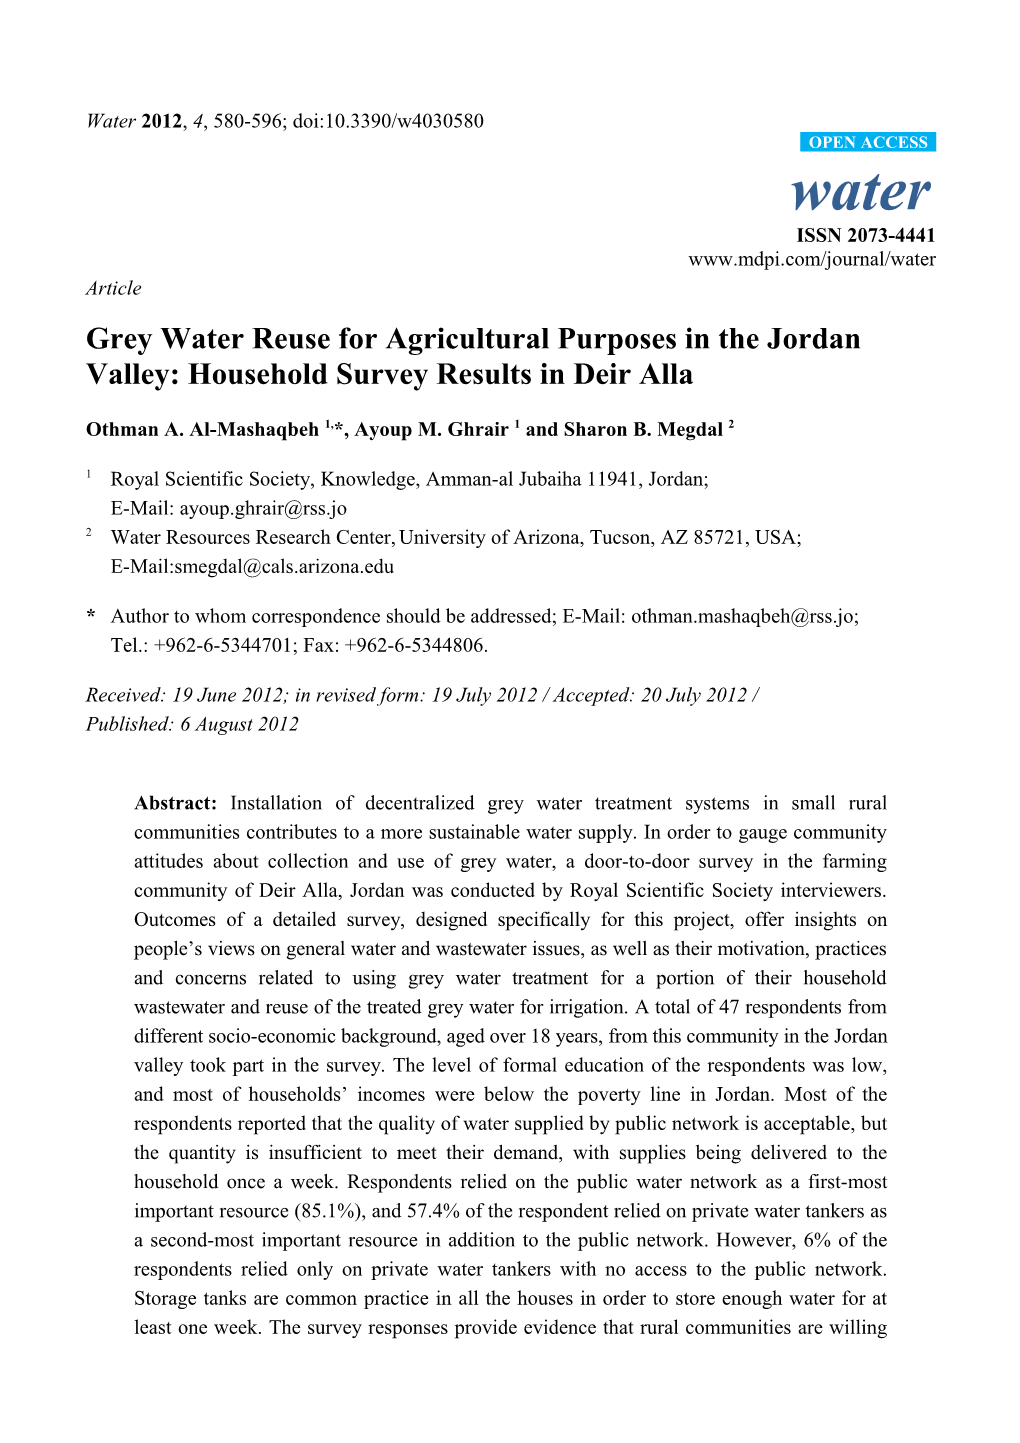 Grey Water Reuse for Agricultural Purposes in the Jordan Valley: Household Survey Results